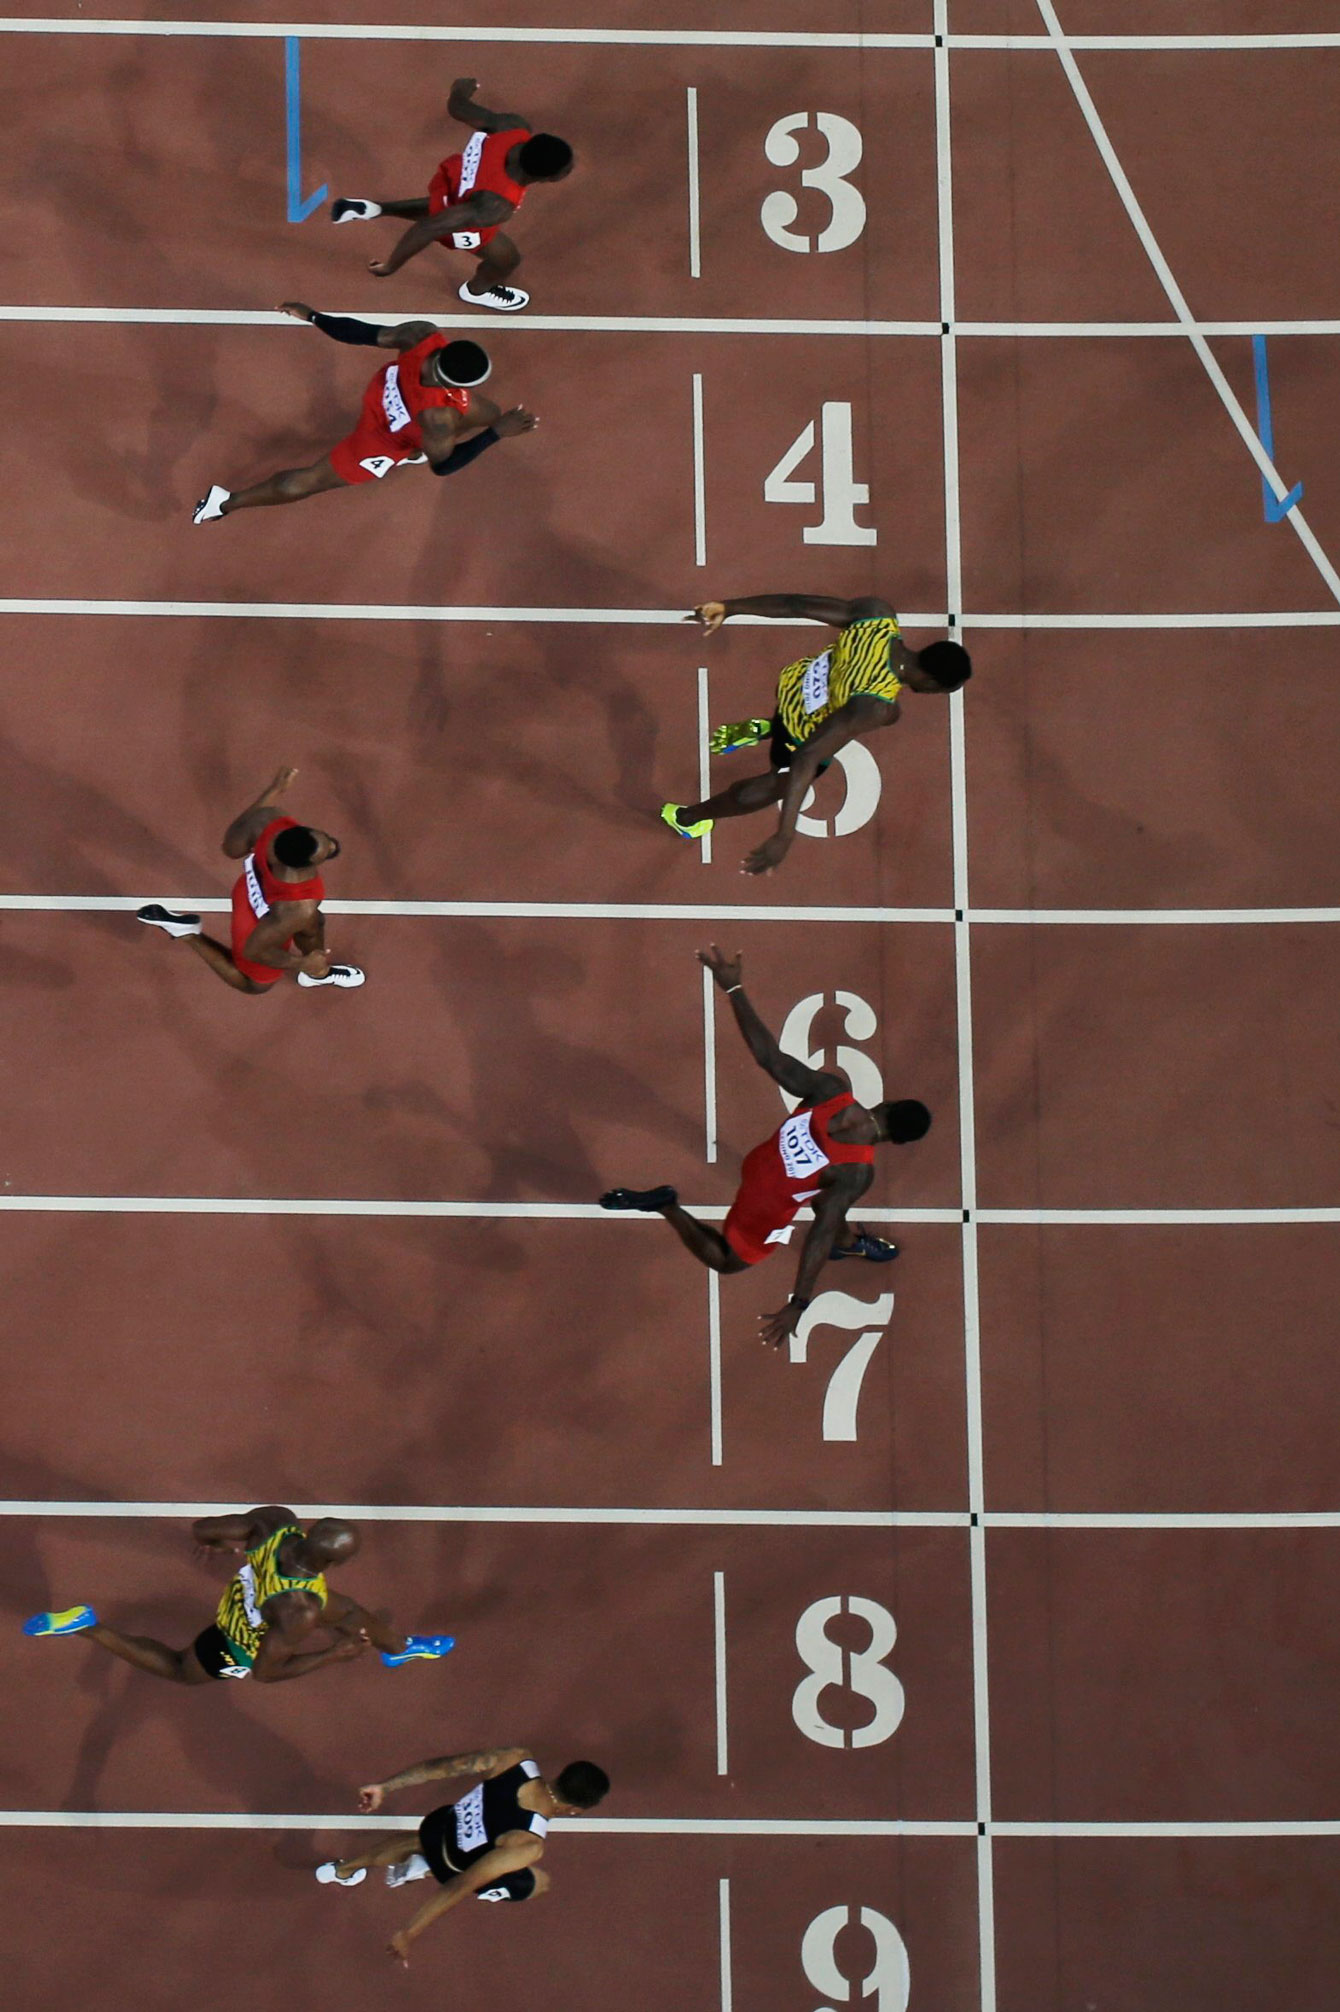 Andre De Grasse (lane nine) leans in for bronze as Usain Bolt (5) and Justin Gatlin (7) battle for gold and silver in the closing moments of the 100m final at the IAAF World Championships in Athletics in Beijing, China on August 23, 2015. 